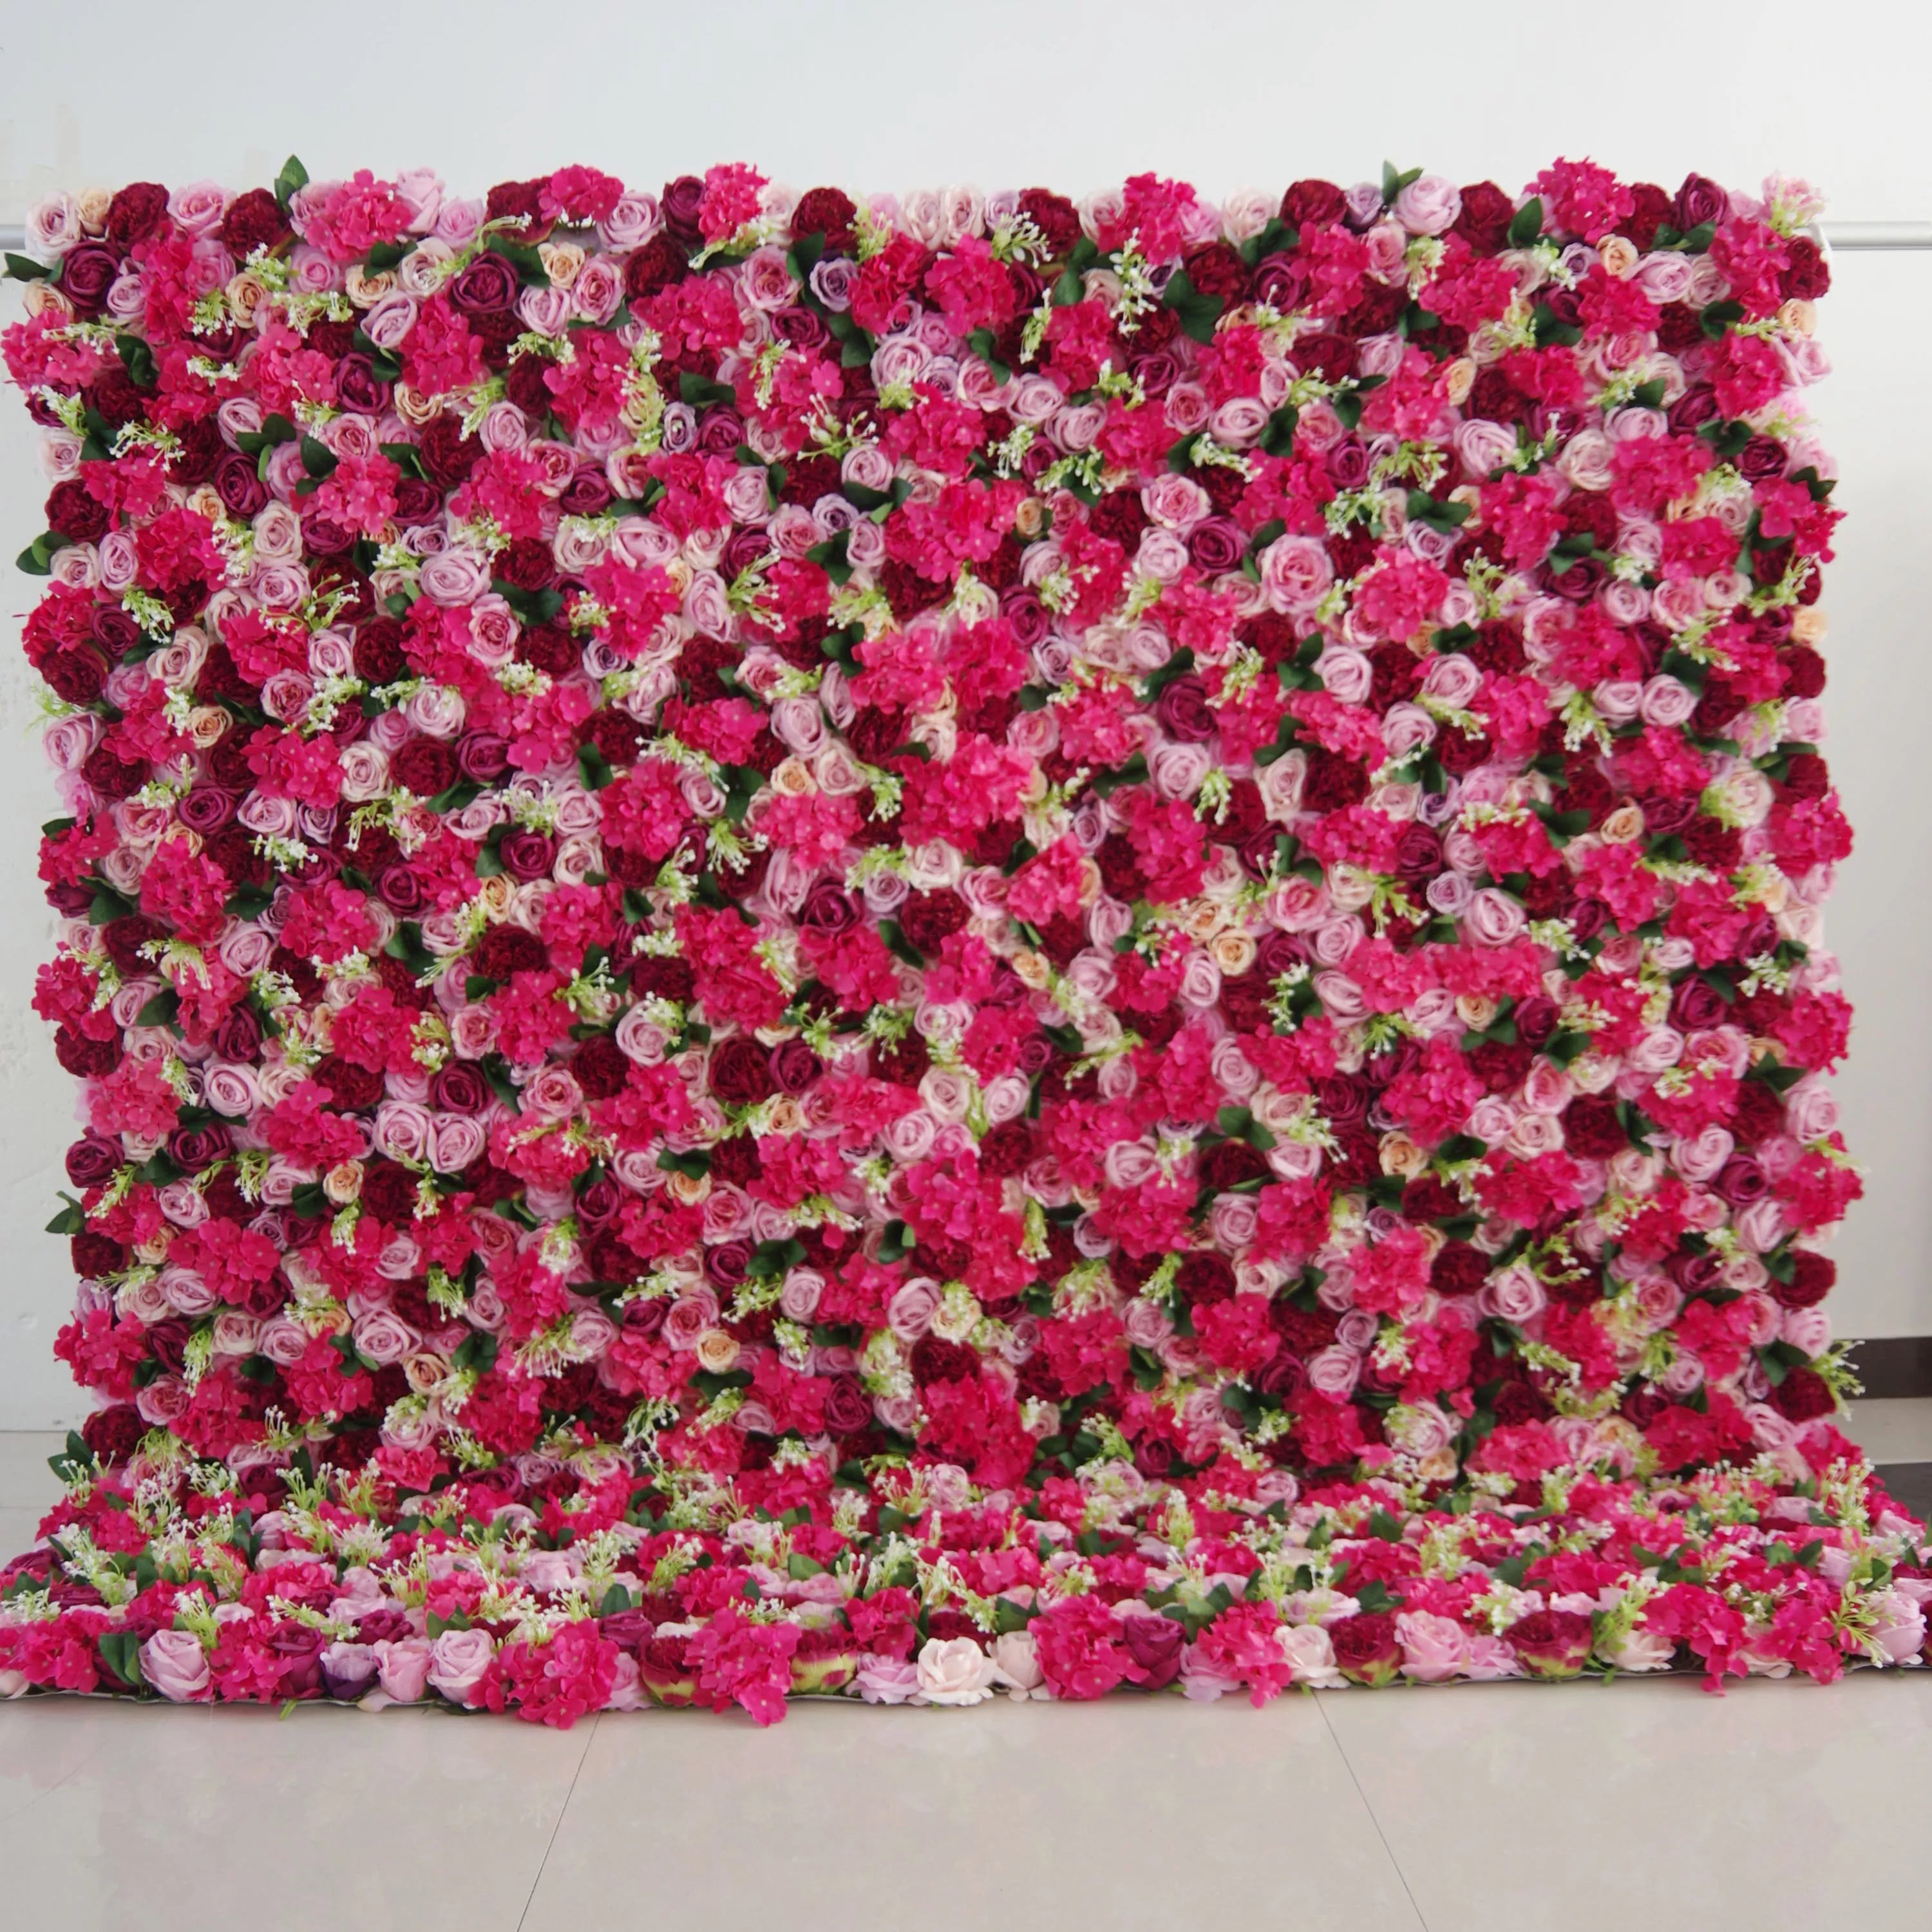 Valar Flowers artificial mixed cerise and dull pink flower wall roll up fabric for weddings and events1